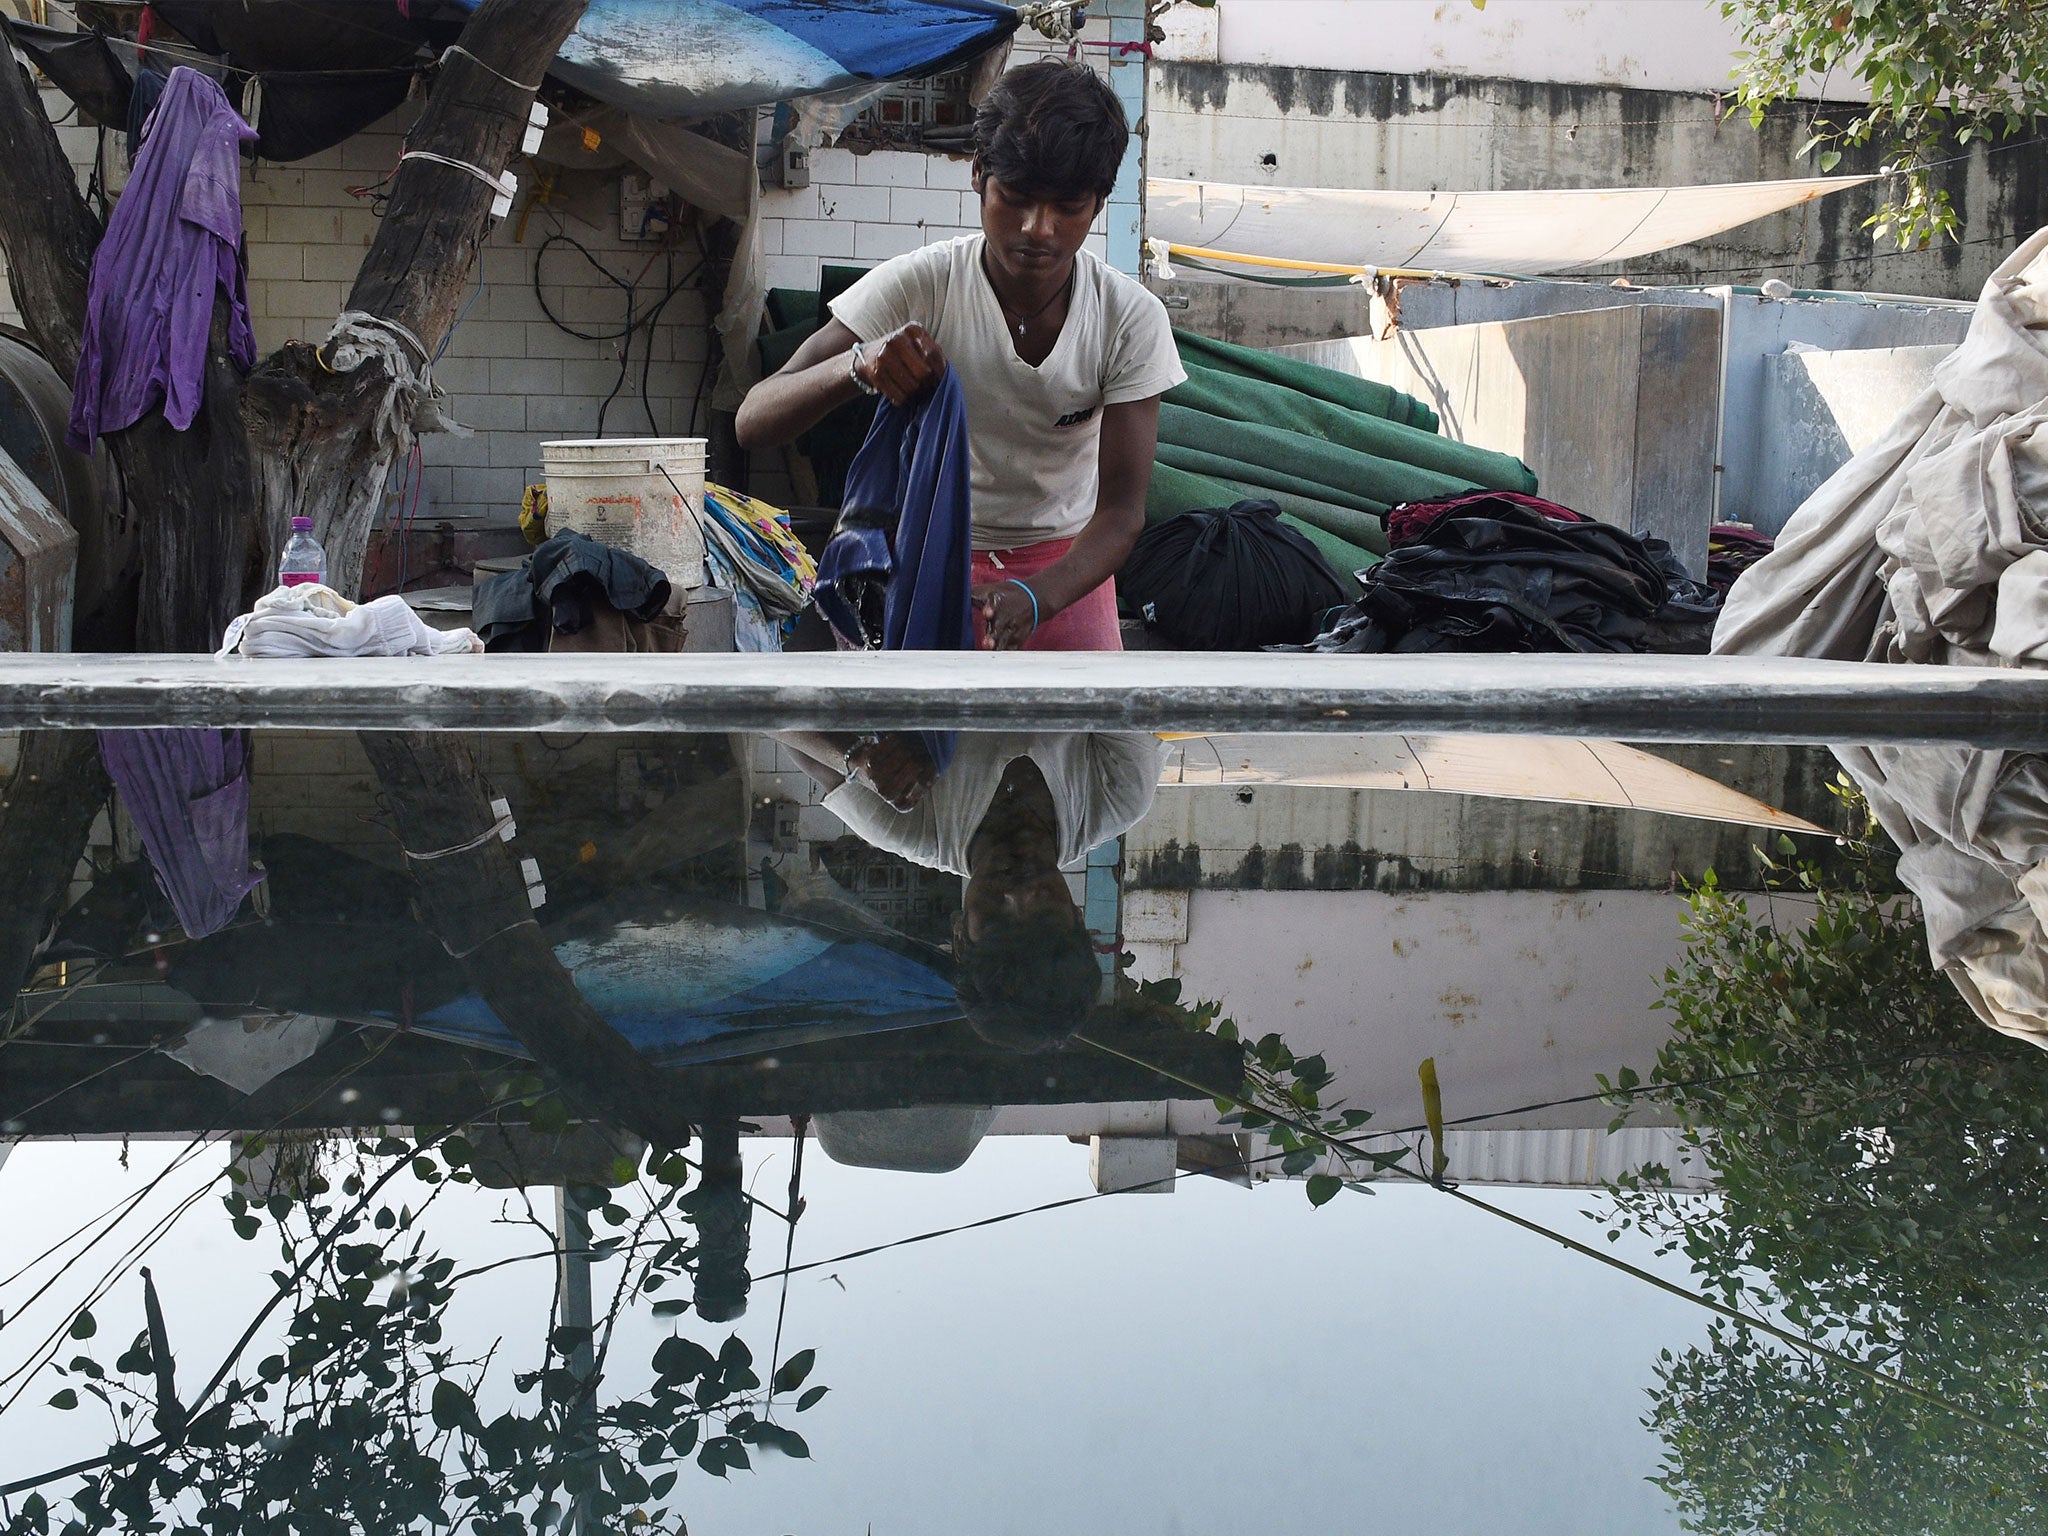 A worker washes clothes in the early morning at an open-air laundry facility in New Delhi